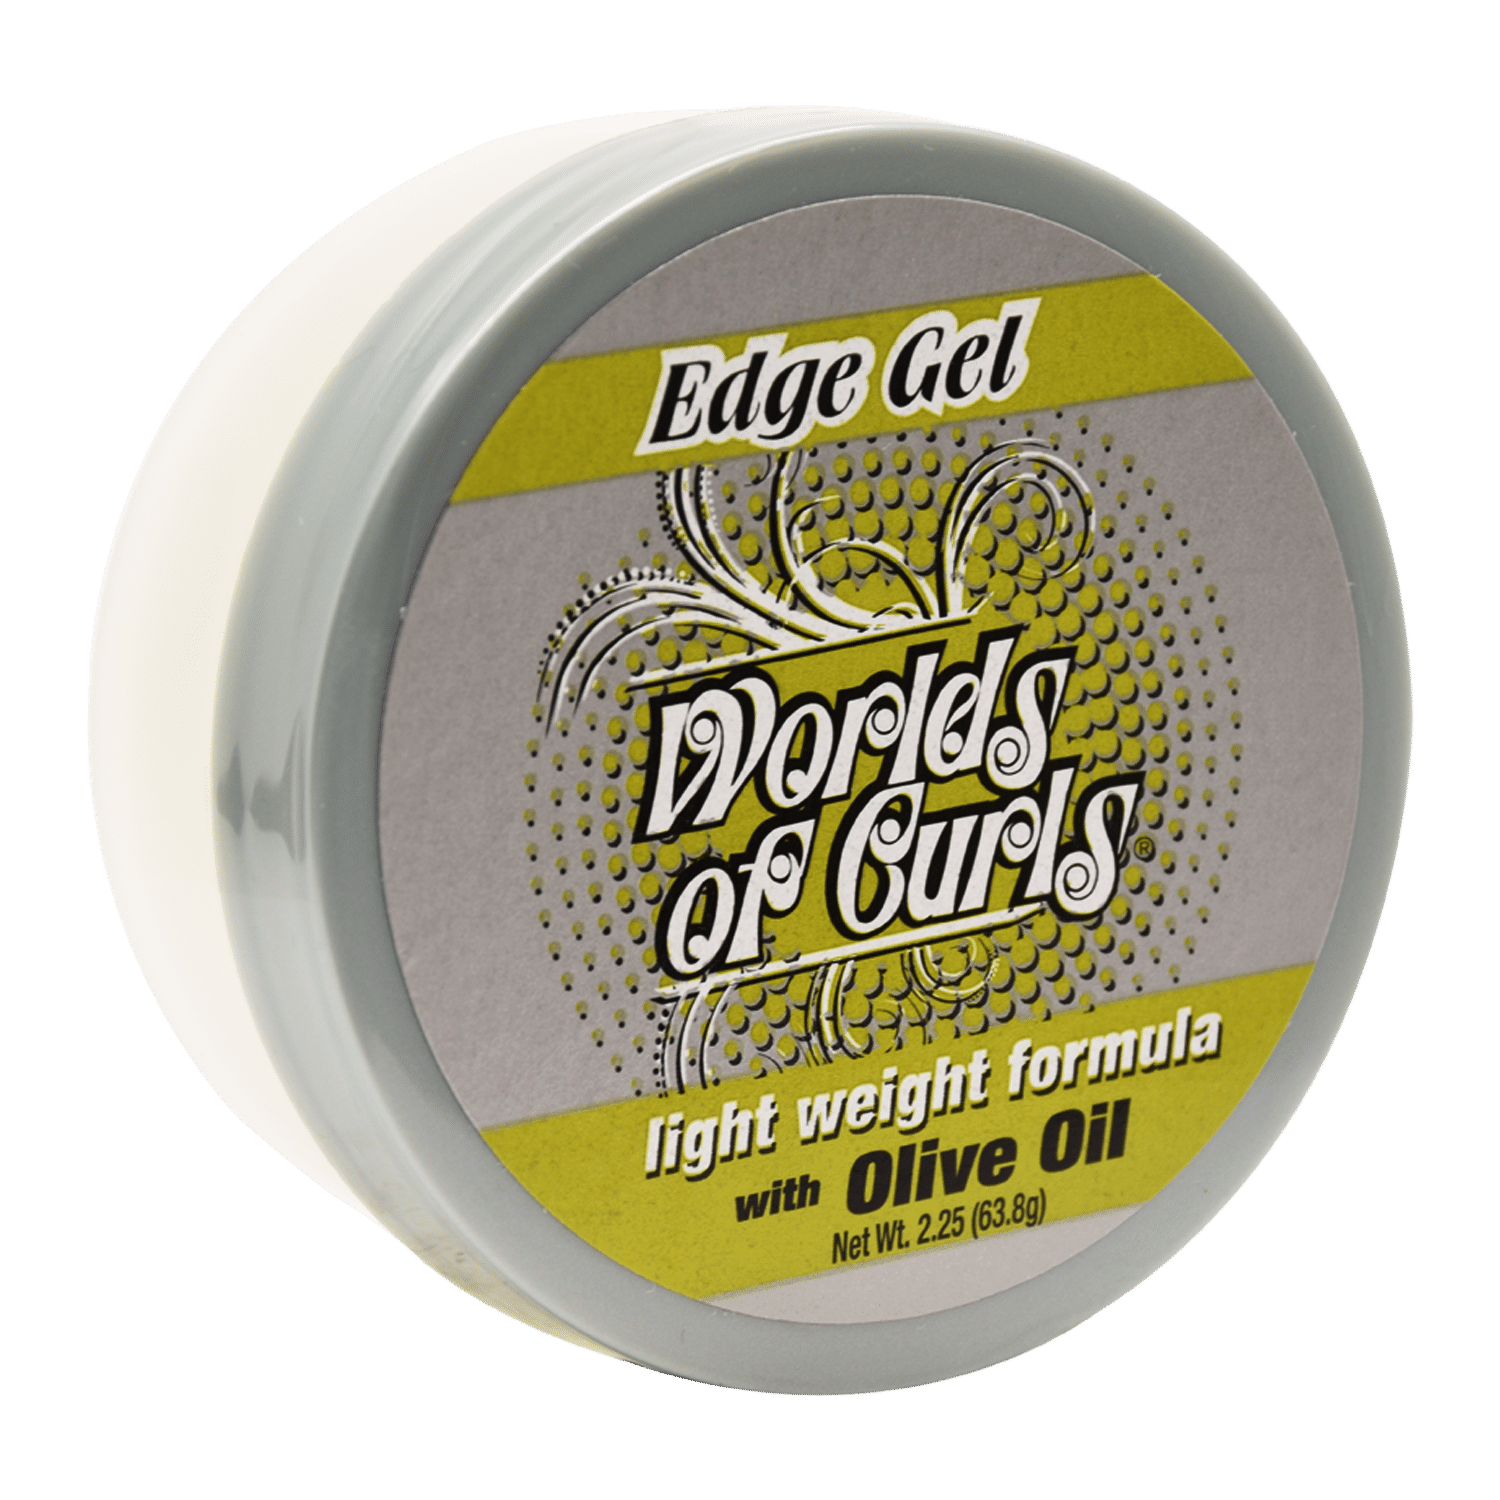 World Of Curls Edge Gel With Olive Oil - 2.25oz